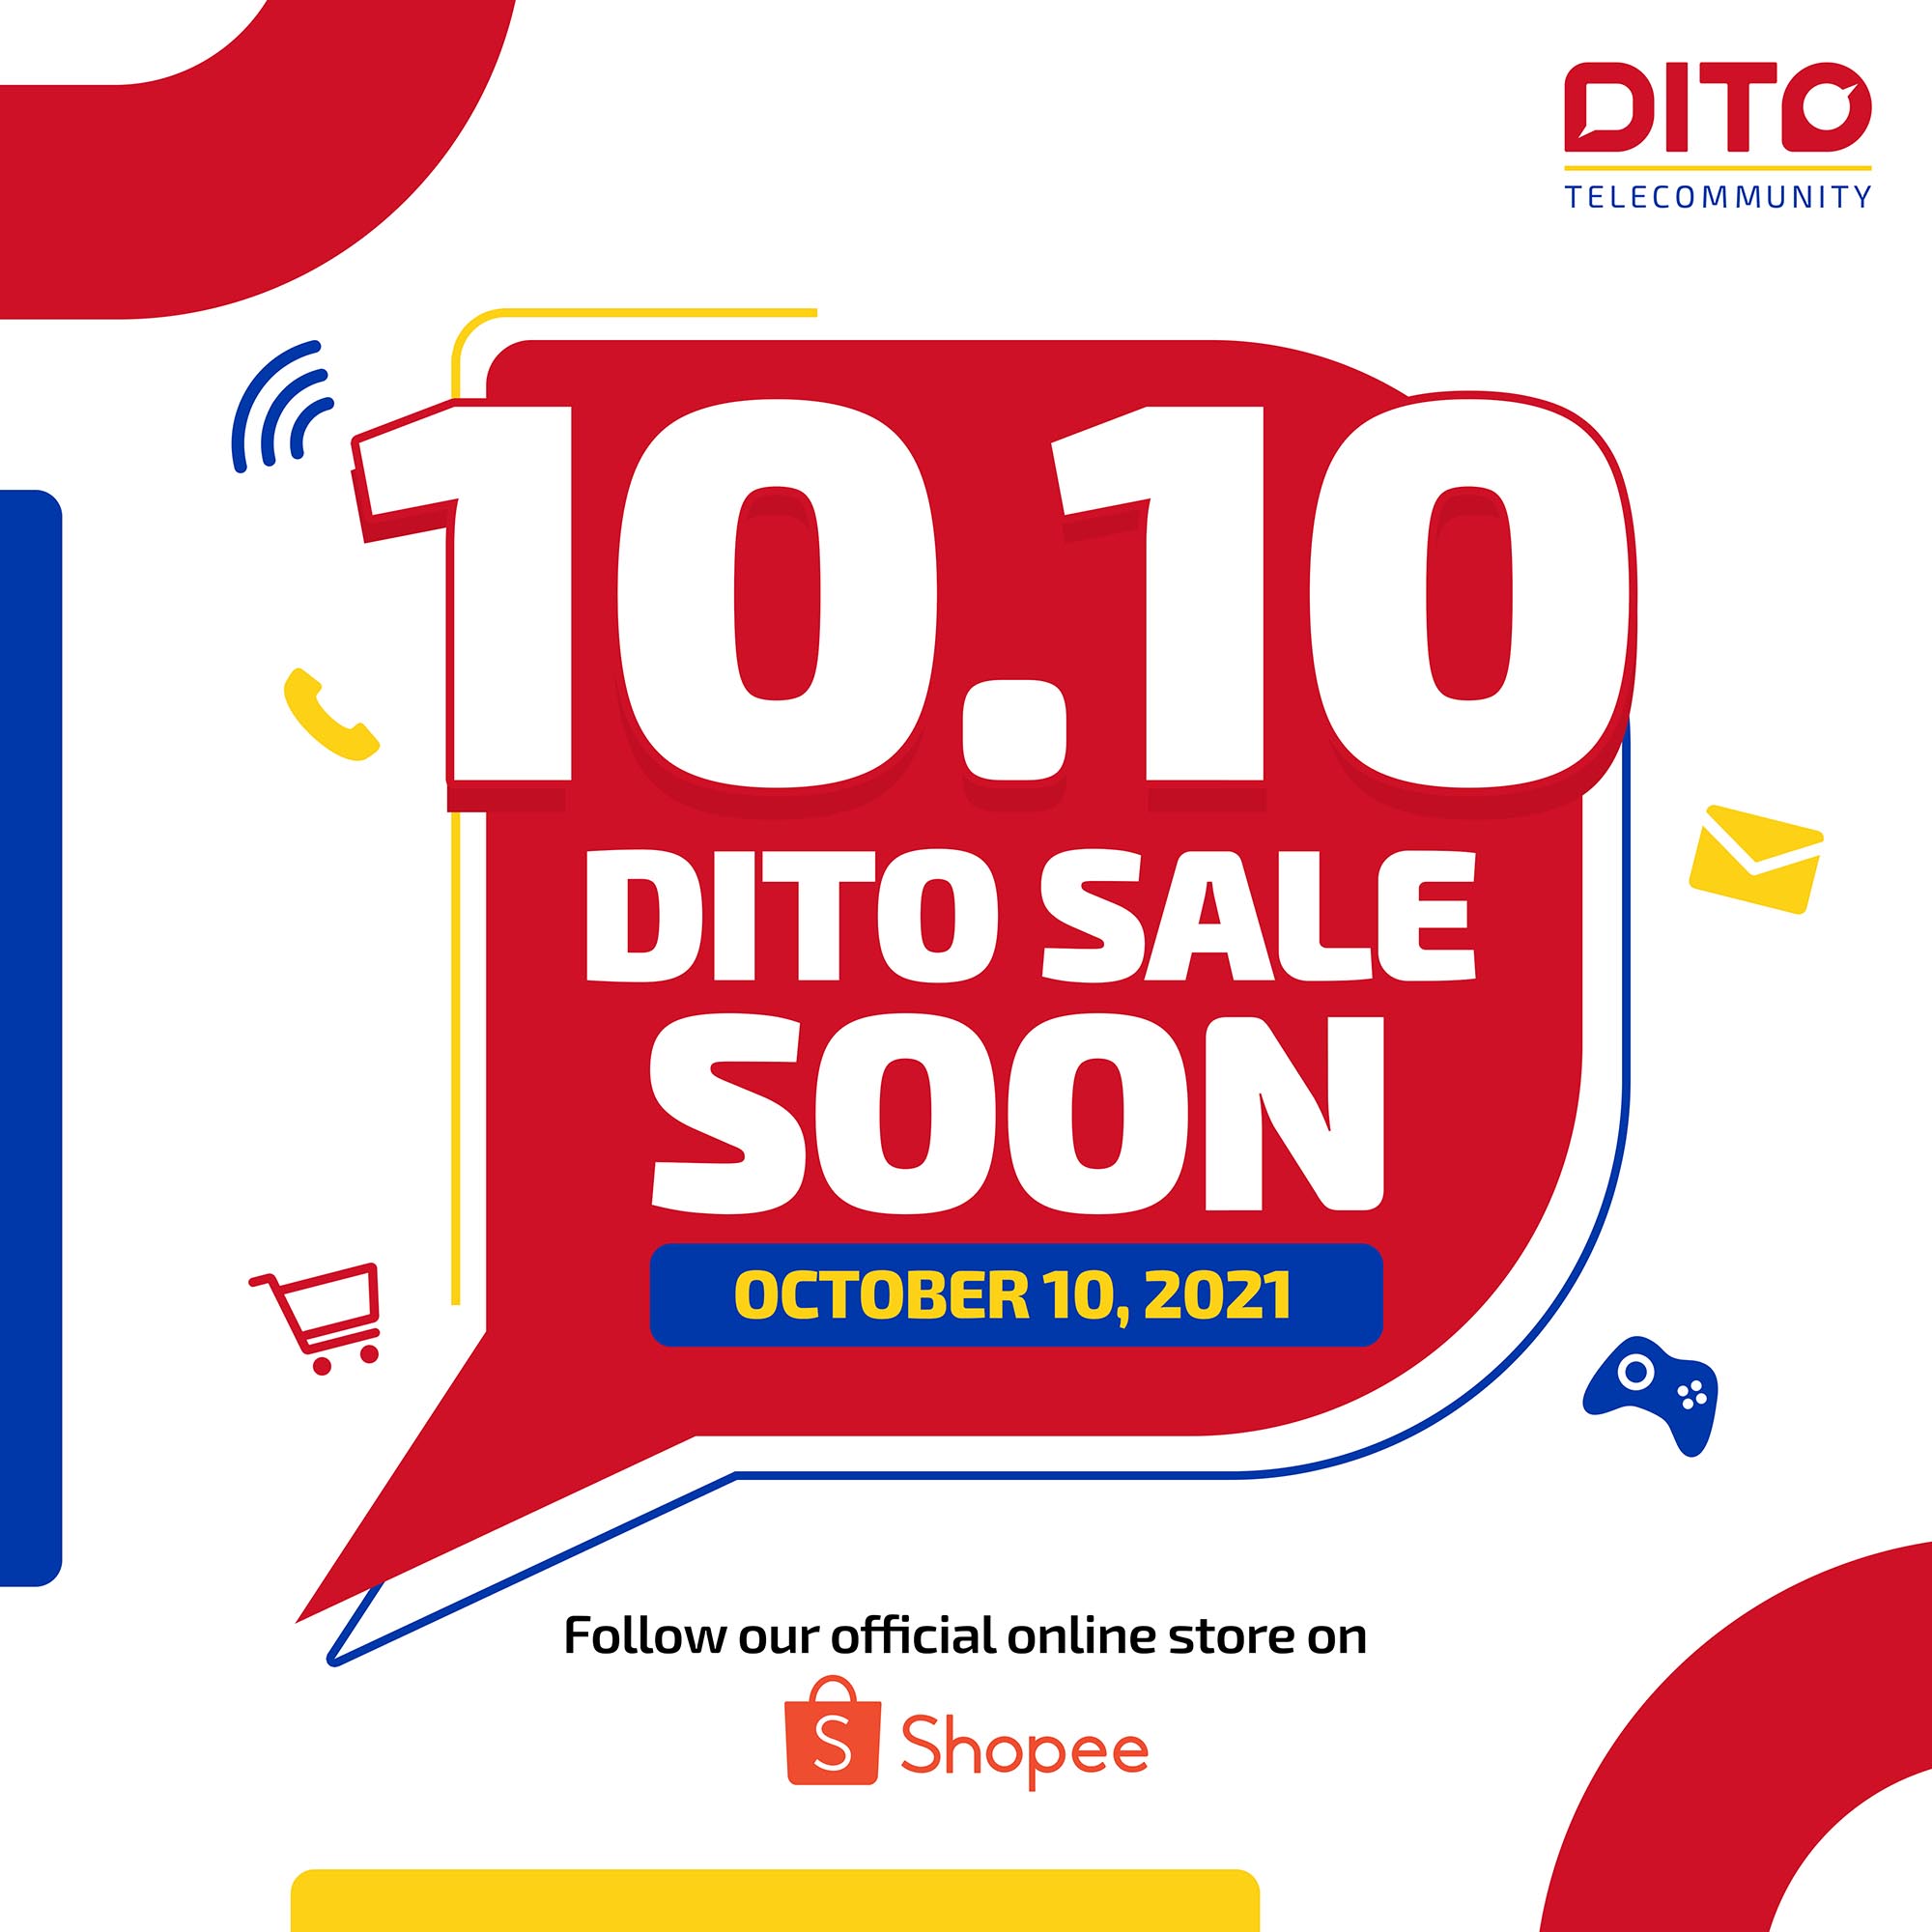 Enjoy MEGA deals and livestreams from DITO this 10.10 on Lazada and Shopee!